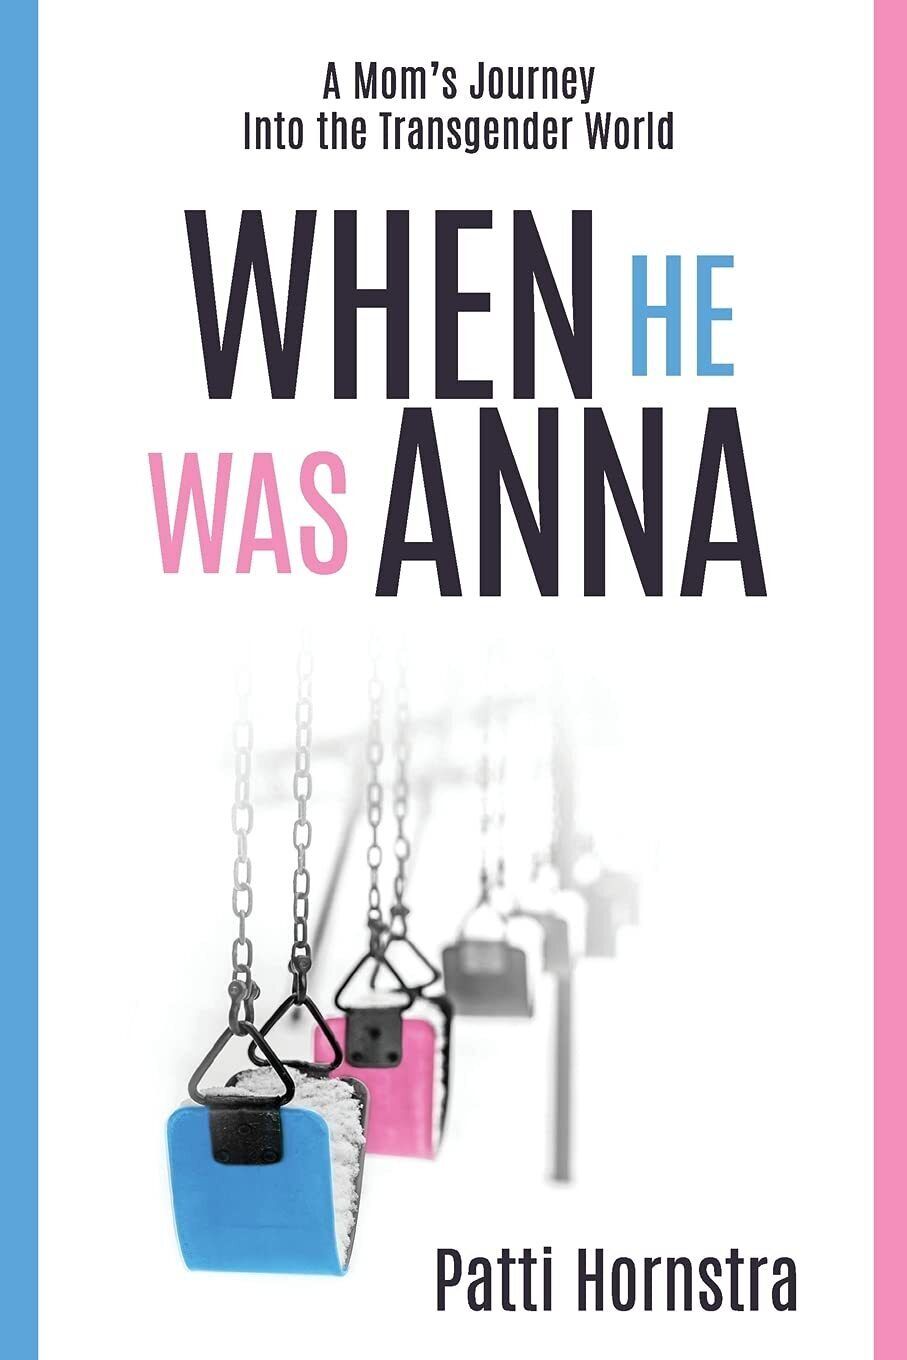 When he was anna